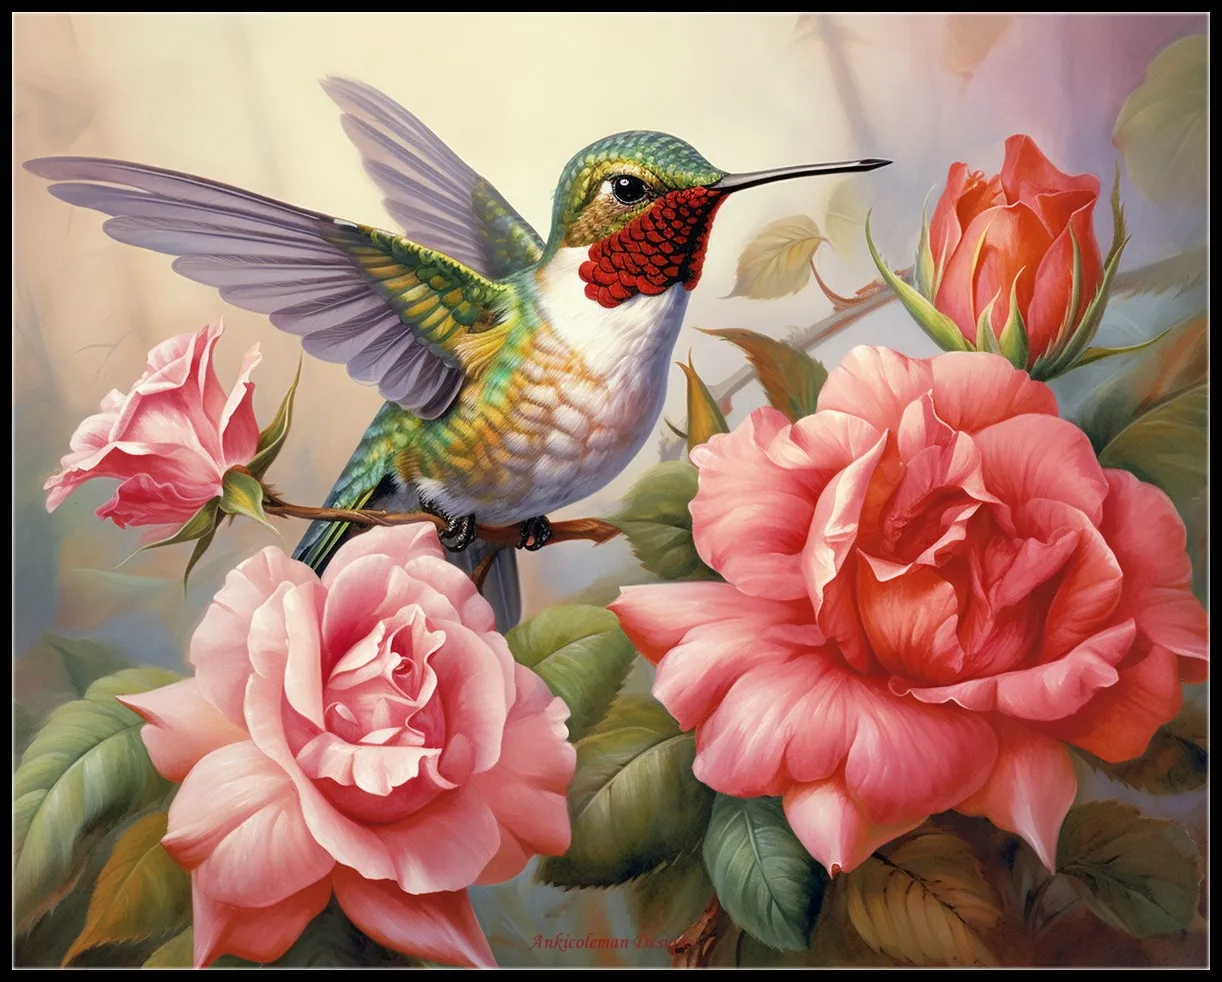 

Hummingbirds in Roses 3 - Counted Cross Stitch Kits - DIY Handmade Needlework Embroidery 14 CT Aida Sets DMC Color